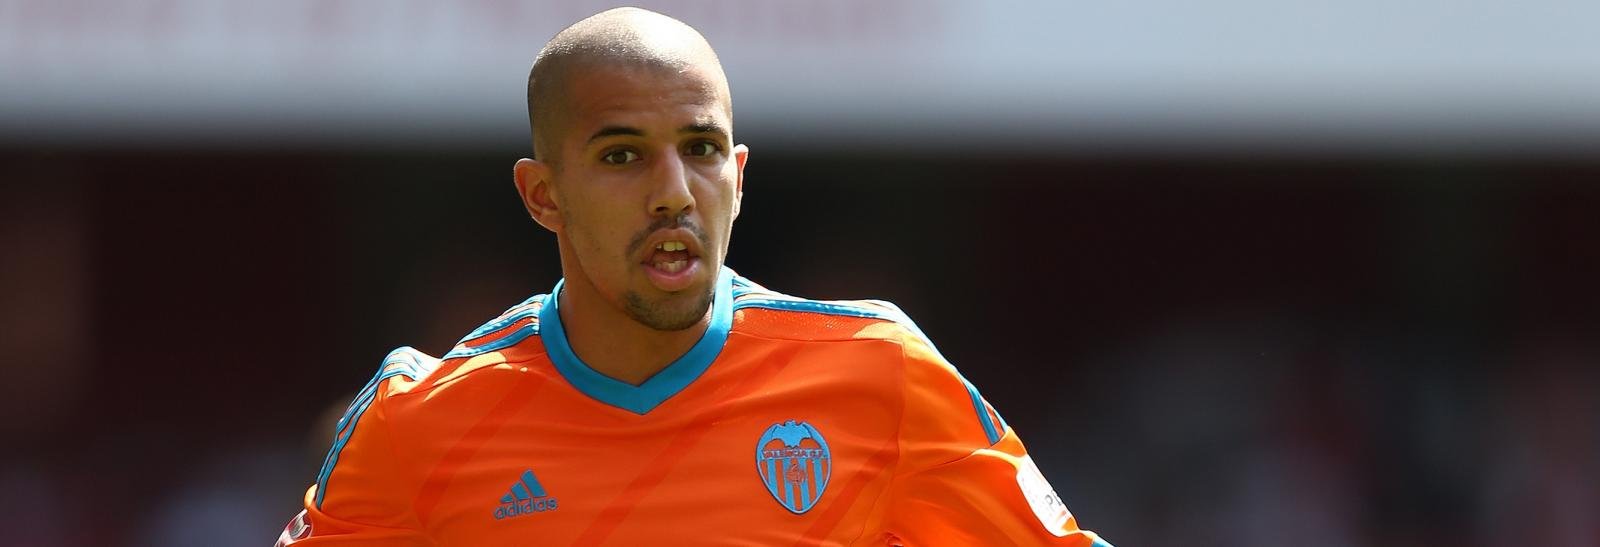 Manchester United bidding to sign Gary Neville’s star winger at Valencia